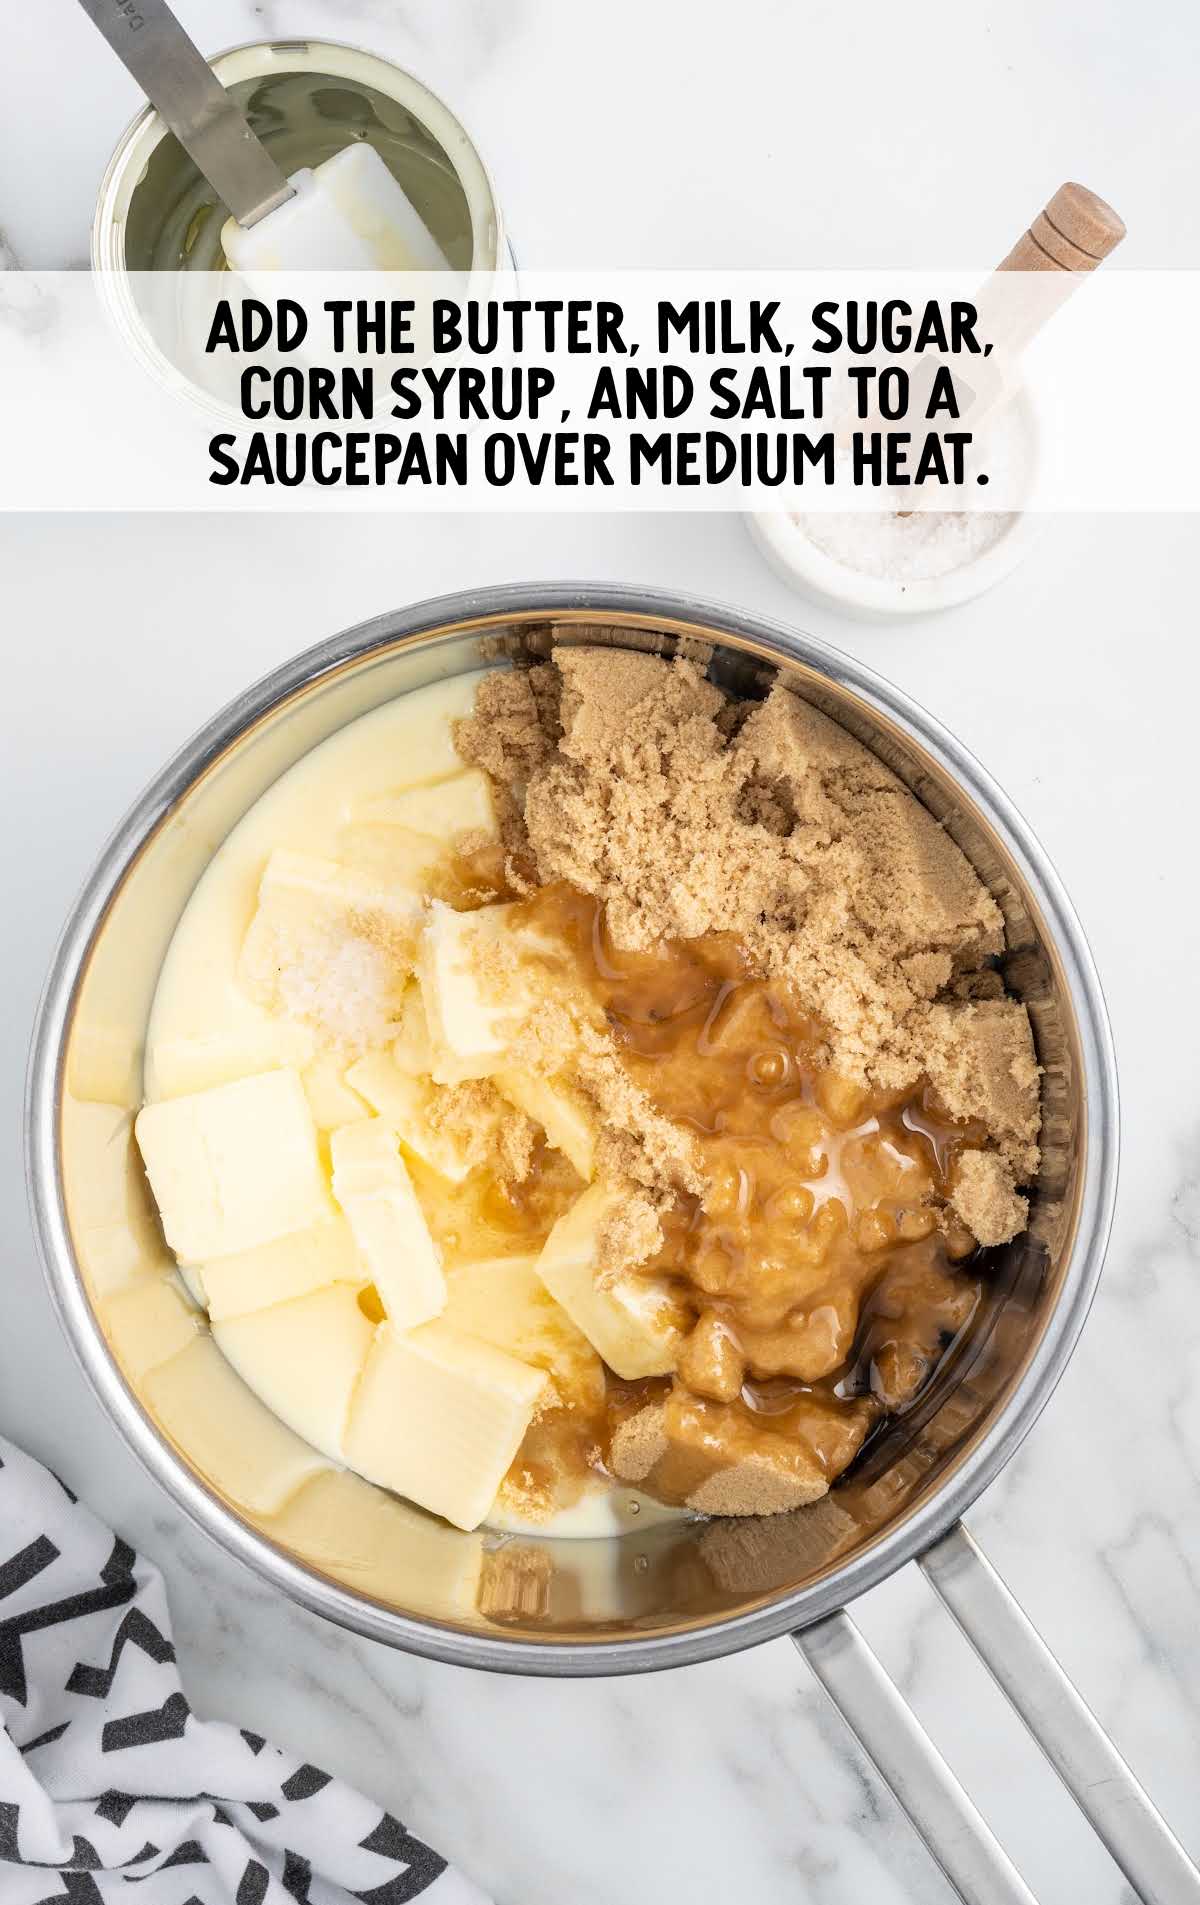 butter, milk, sugar, corn syrup, and salt added to a saucepan